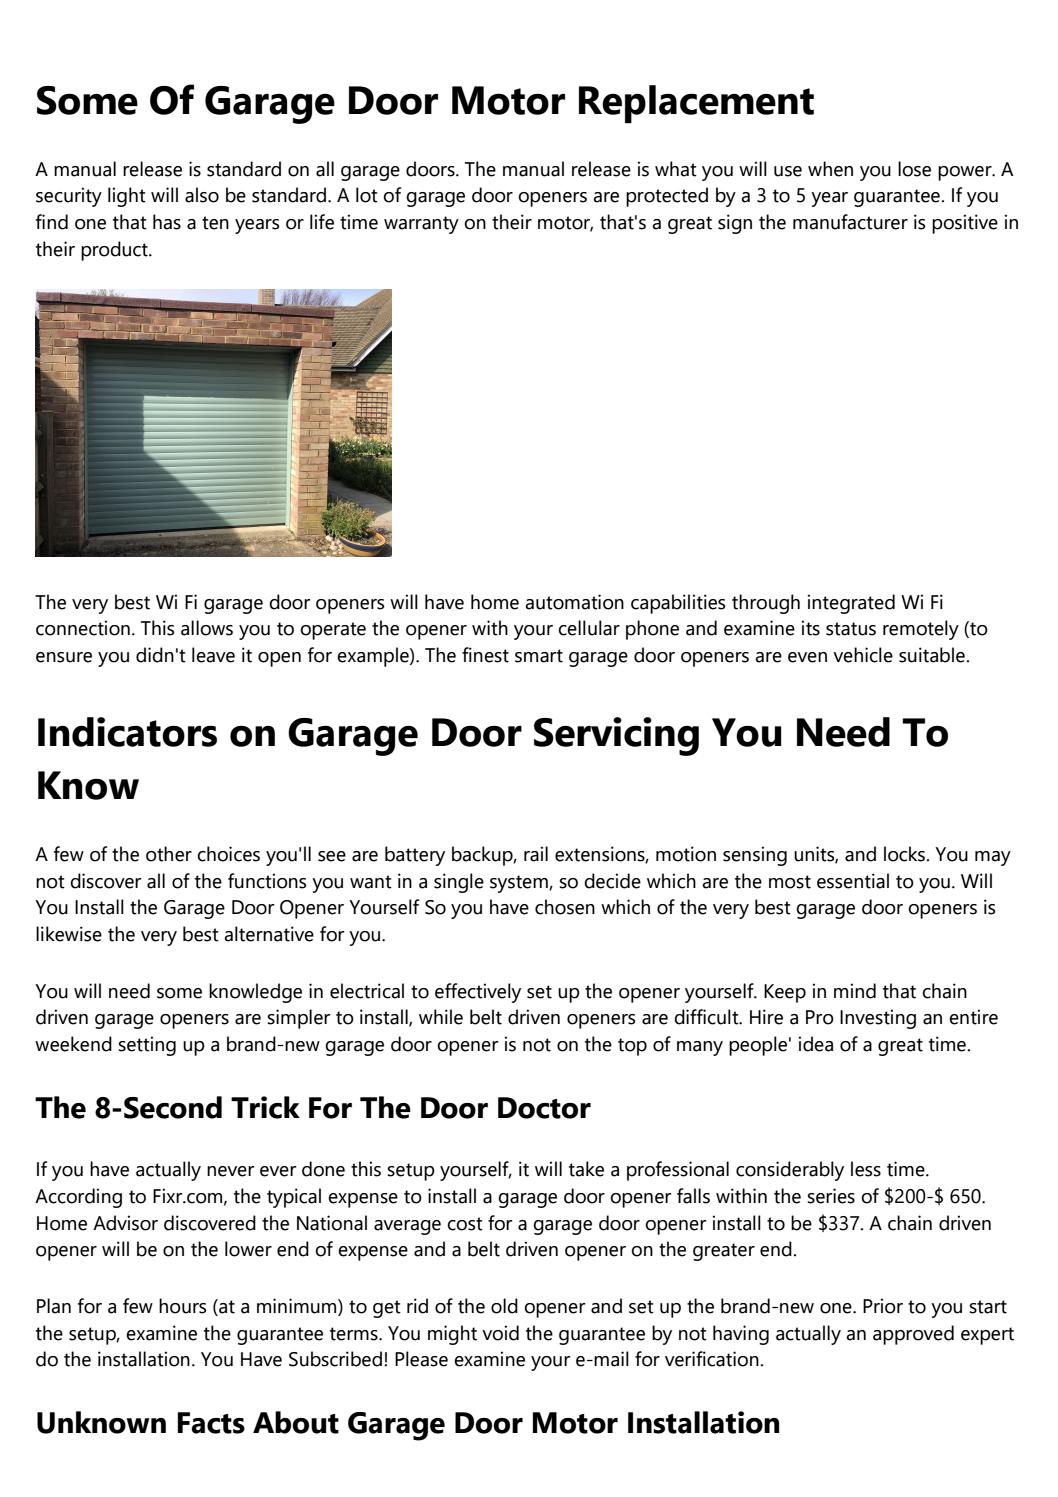 Less known facts about garage doors that
you should get to know